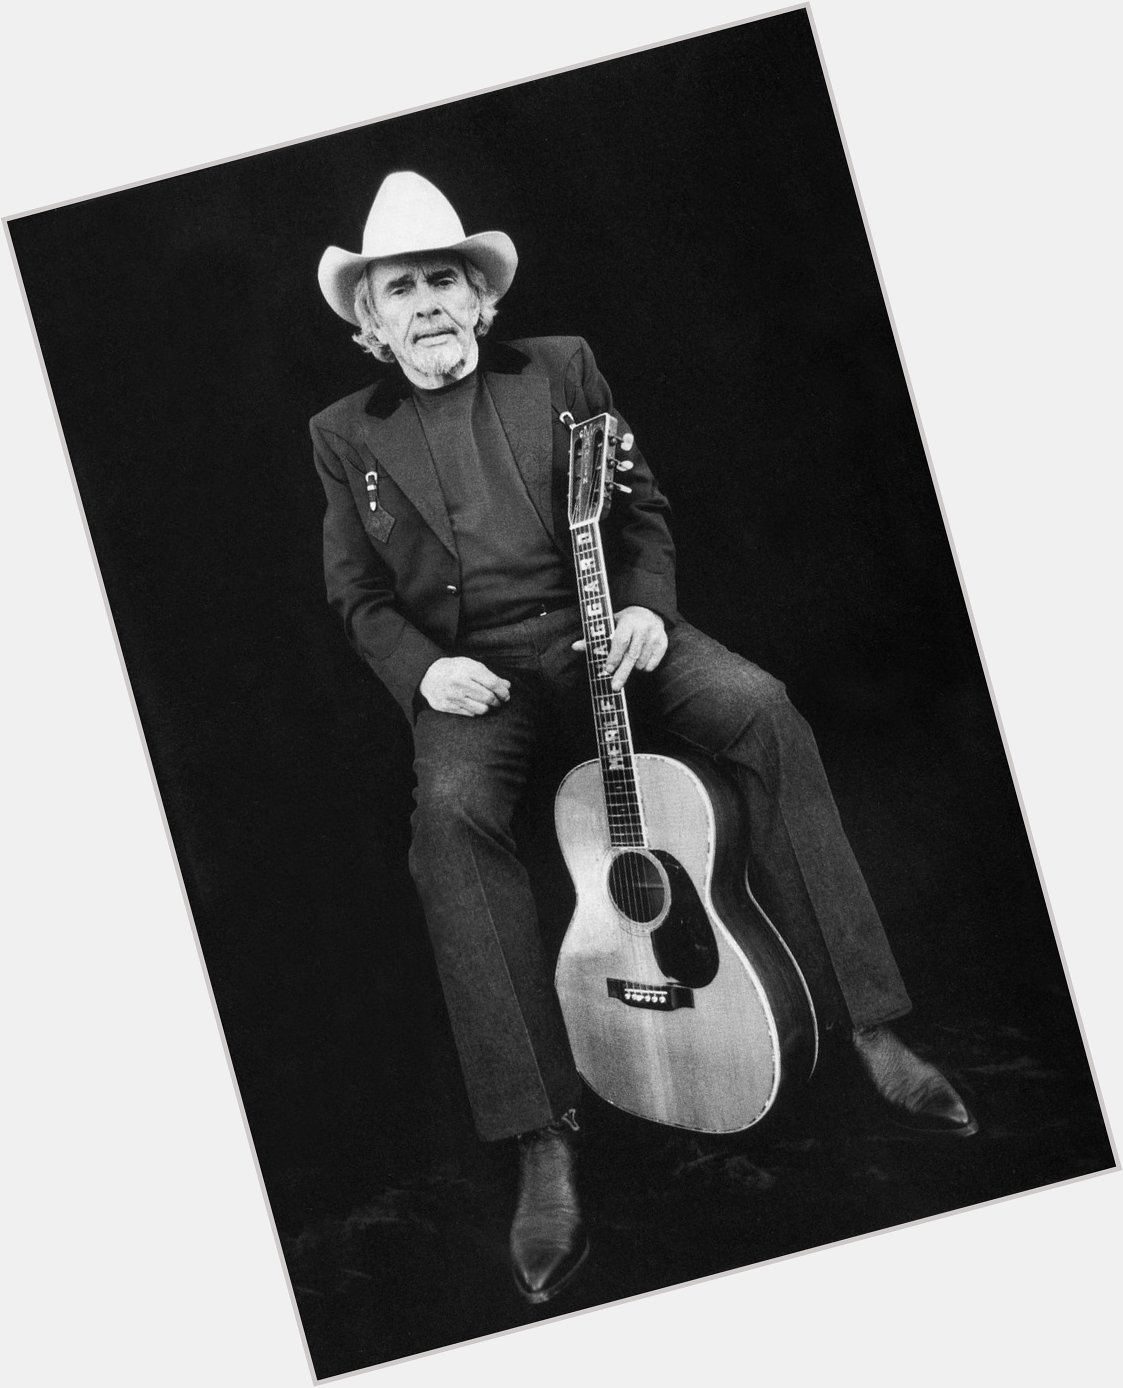 Happy Belated Birthday to the great Merle Haggard. 